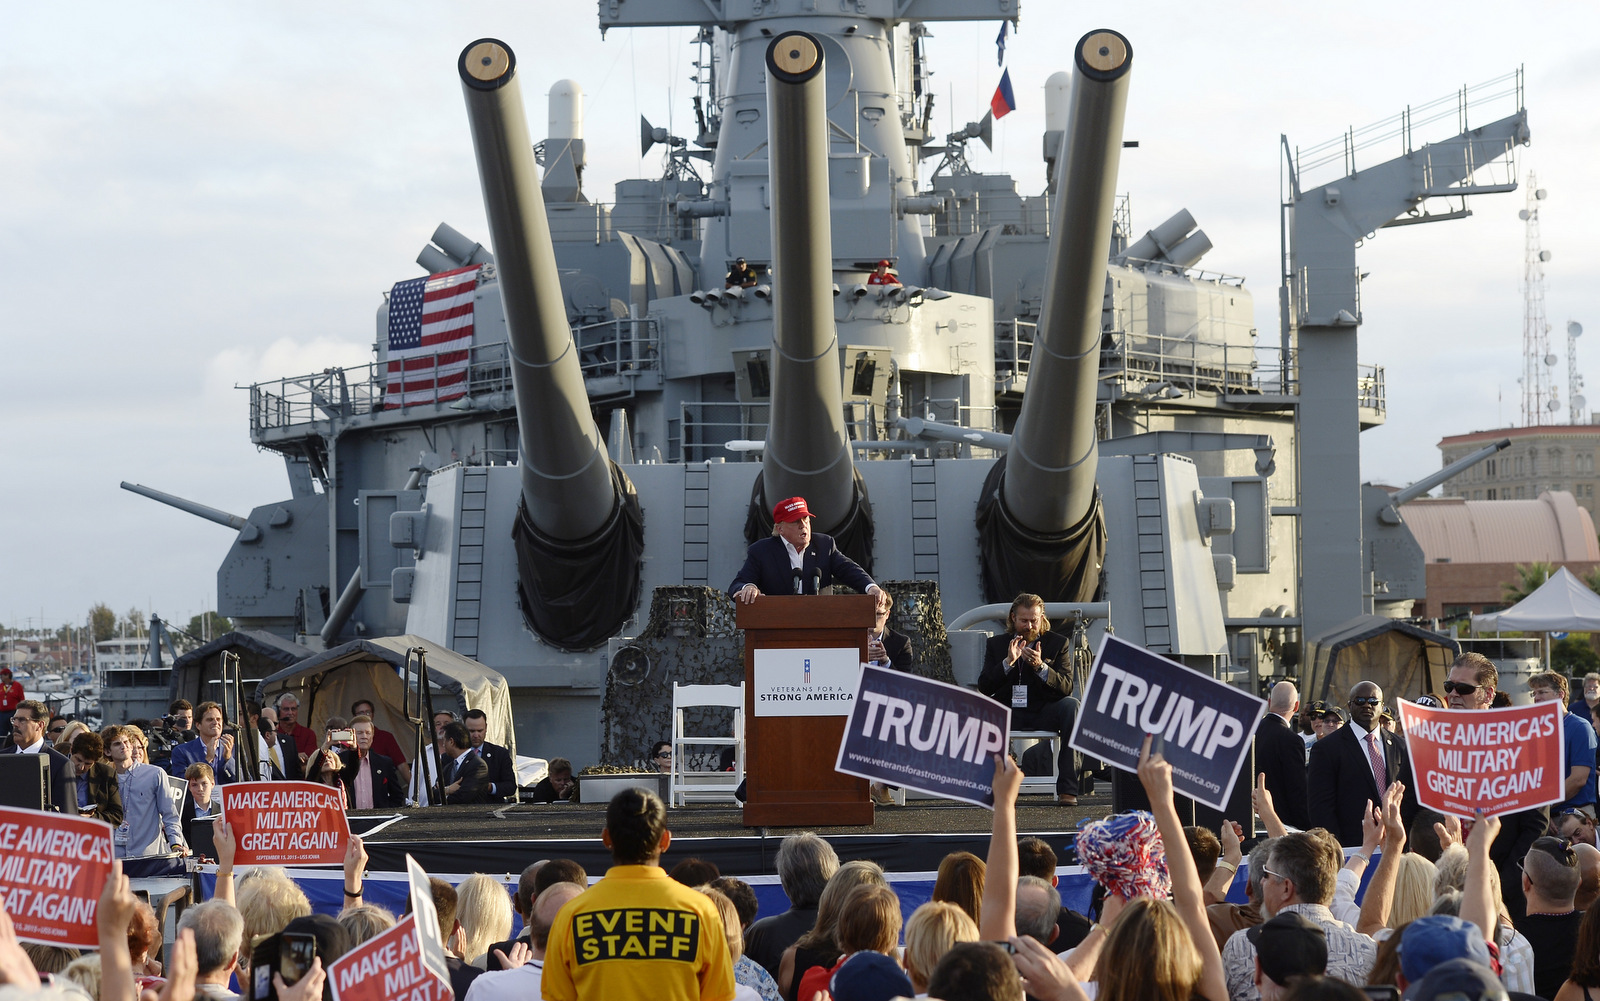 Donald Trump speaks during a campaign event aboard the USS Iowa battleship in Los Angeles Tuesday, Sept. 15, 2015. (AP/Kevork Djansezian)